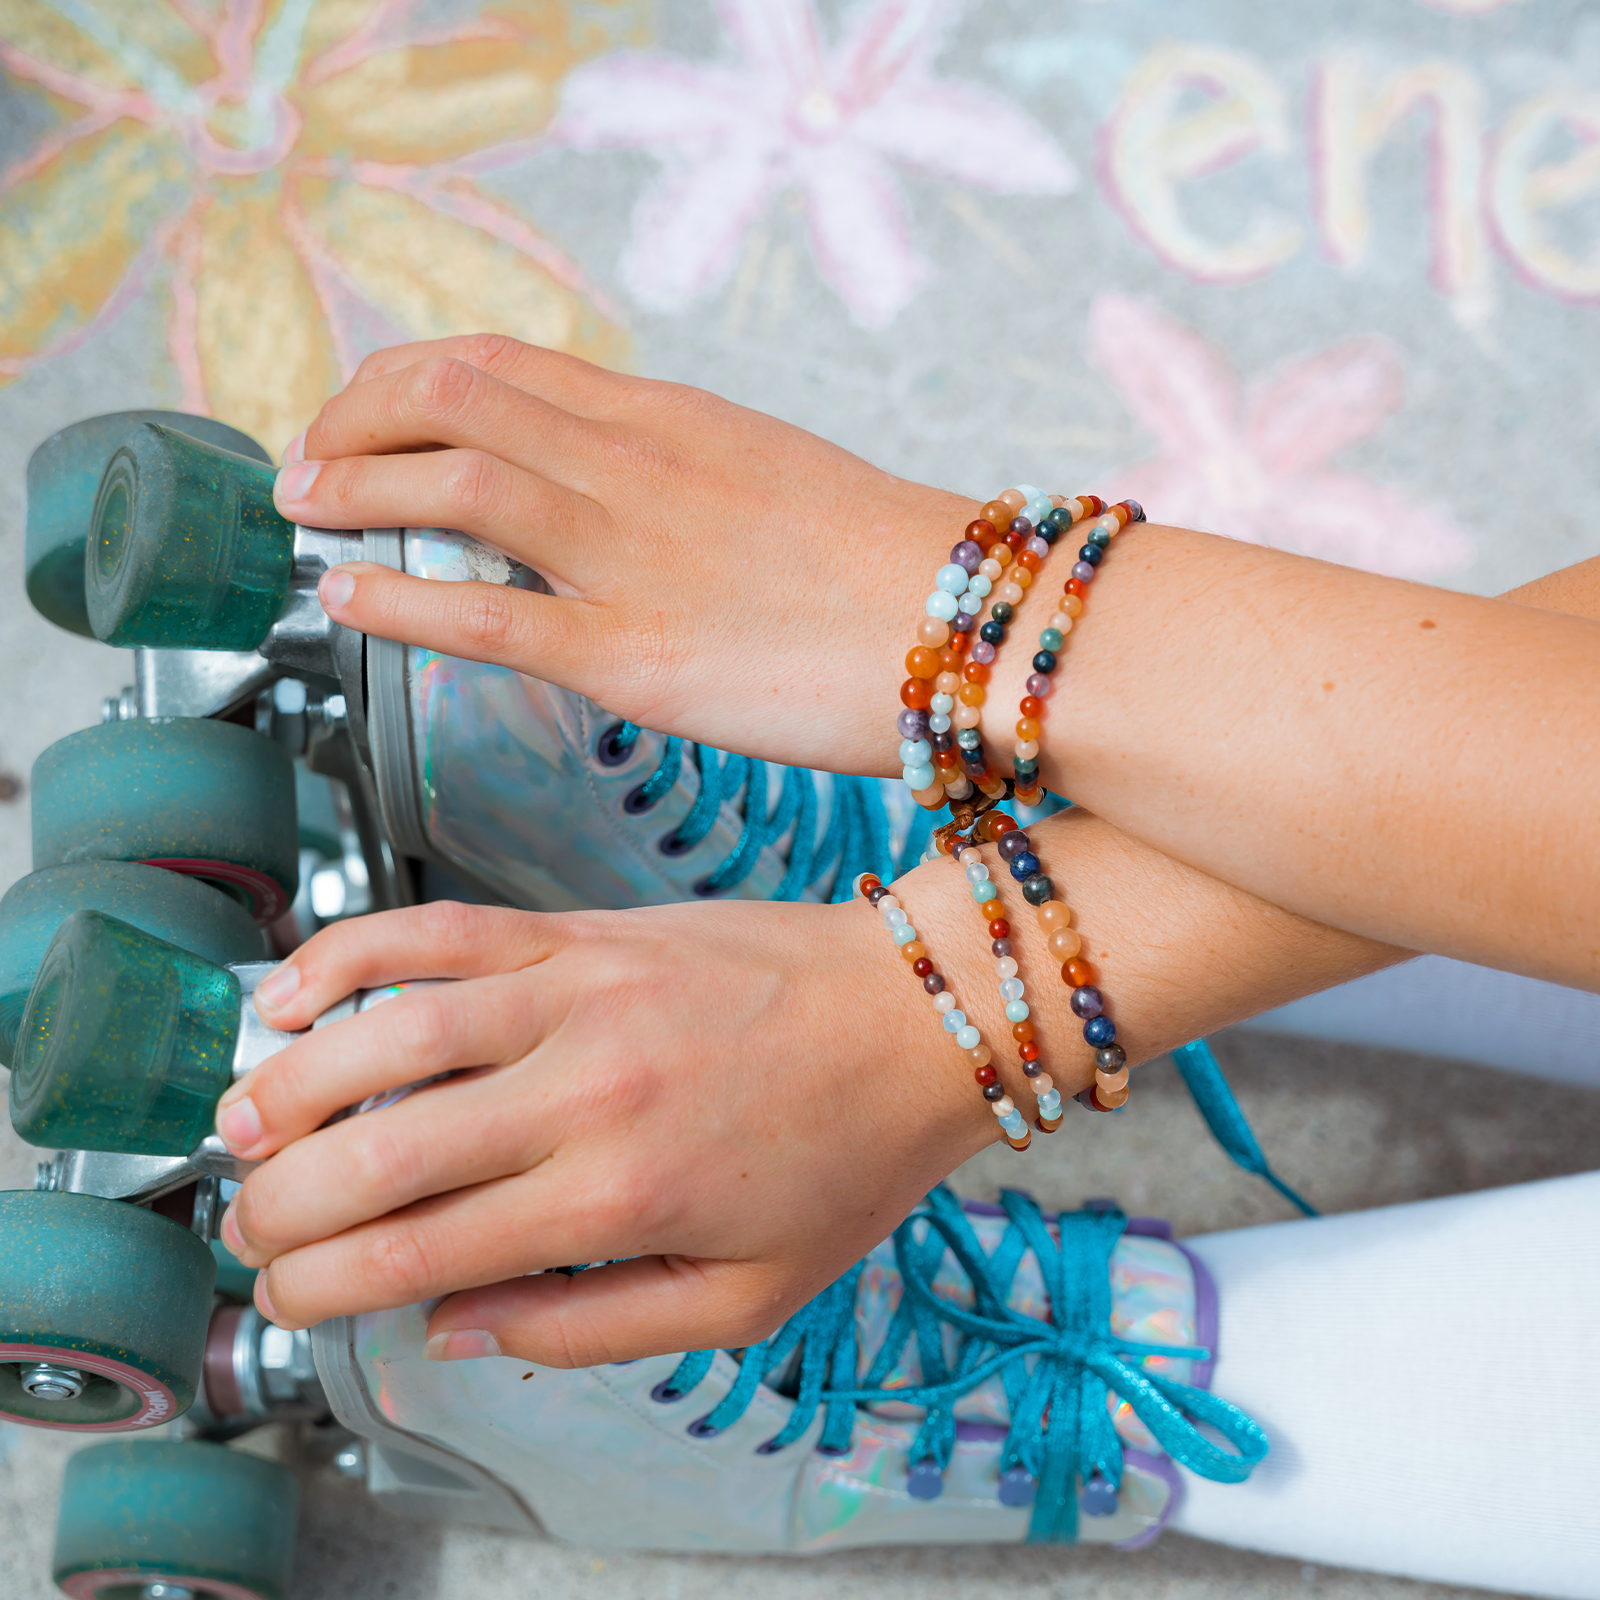 Colorful Healing Bracelets with Roller Skates in the Background